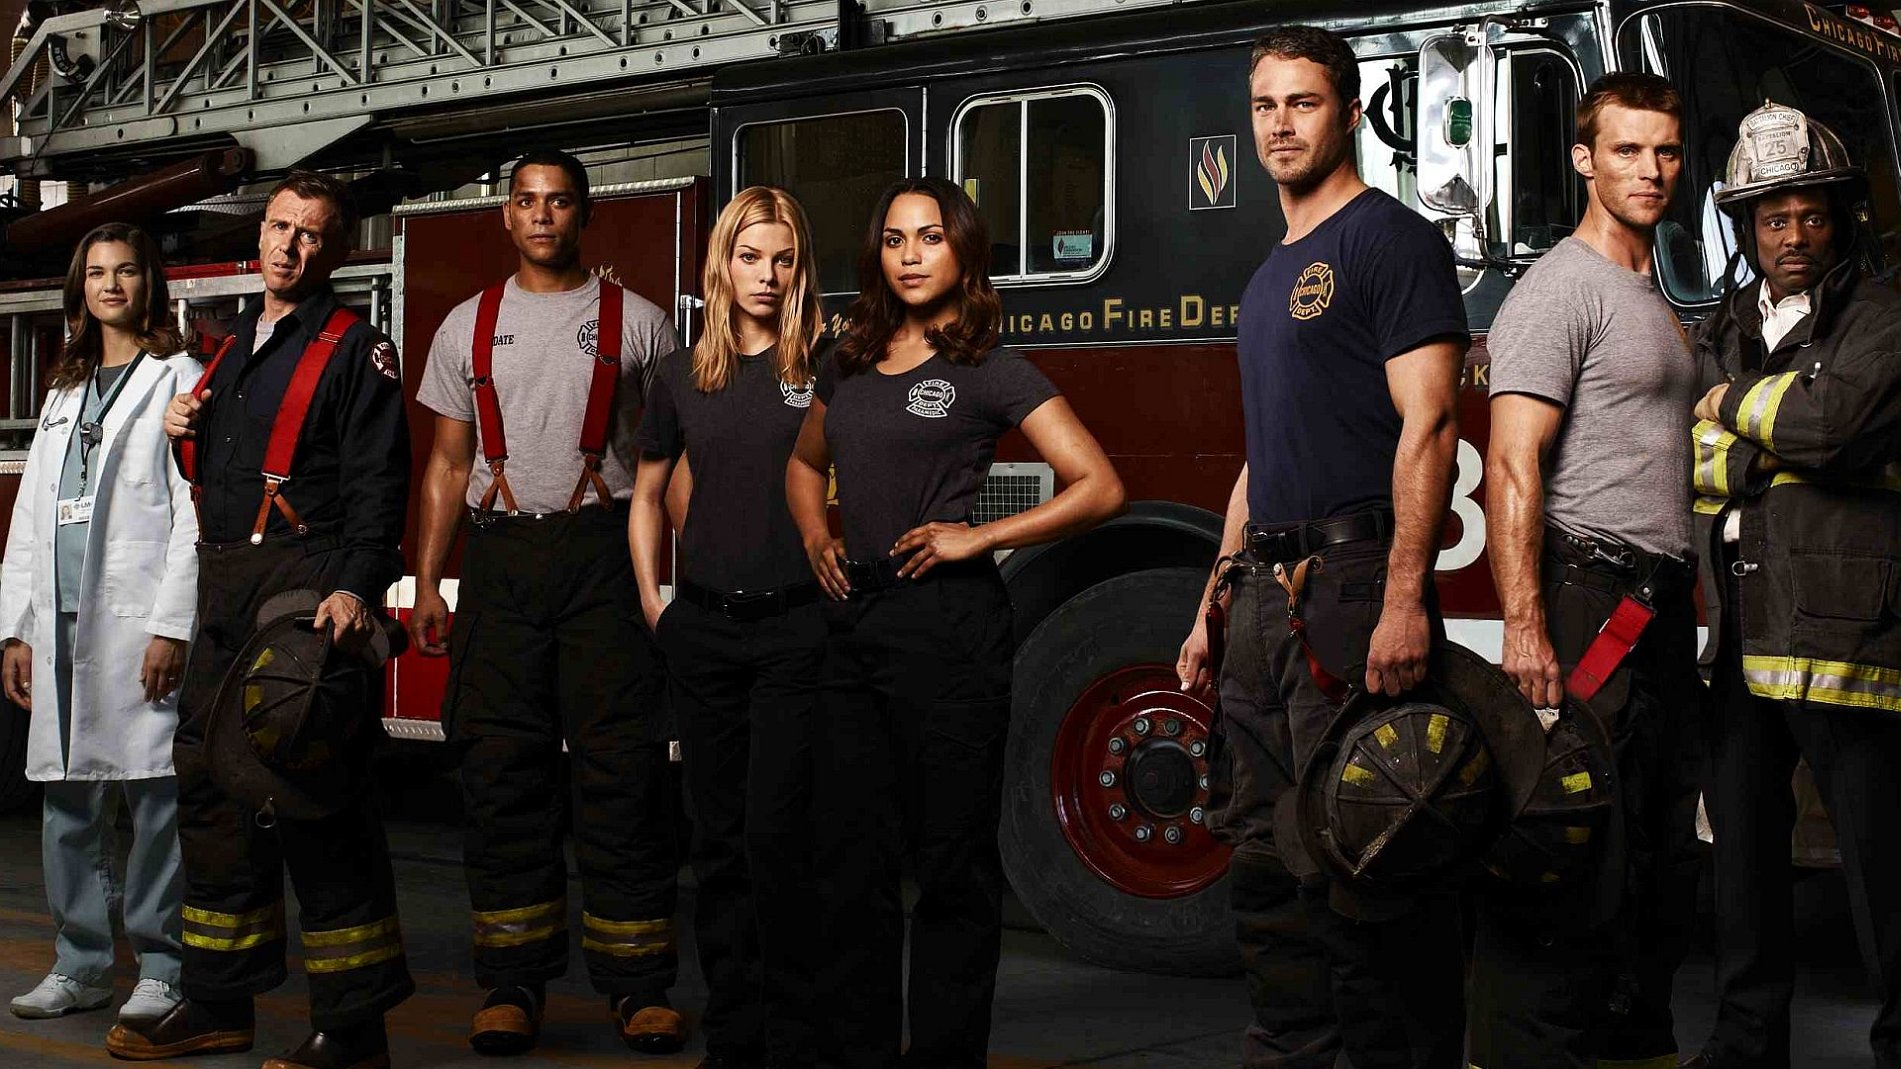 WATCH: 'Chicago Fire' Season 5: Stream Episodes Online Free - Is There A Season 5 Of Chicago Fire